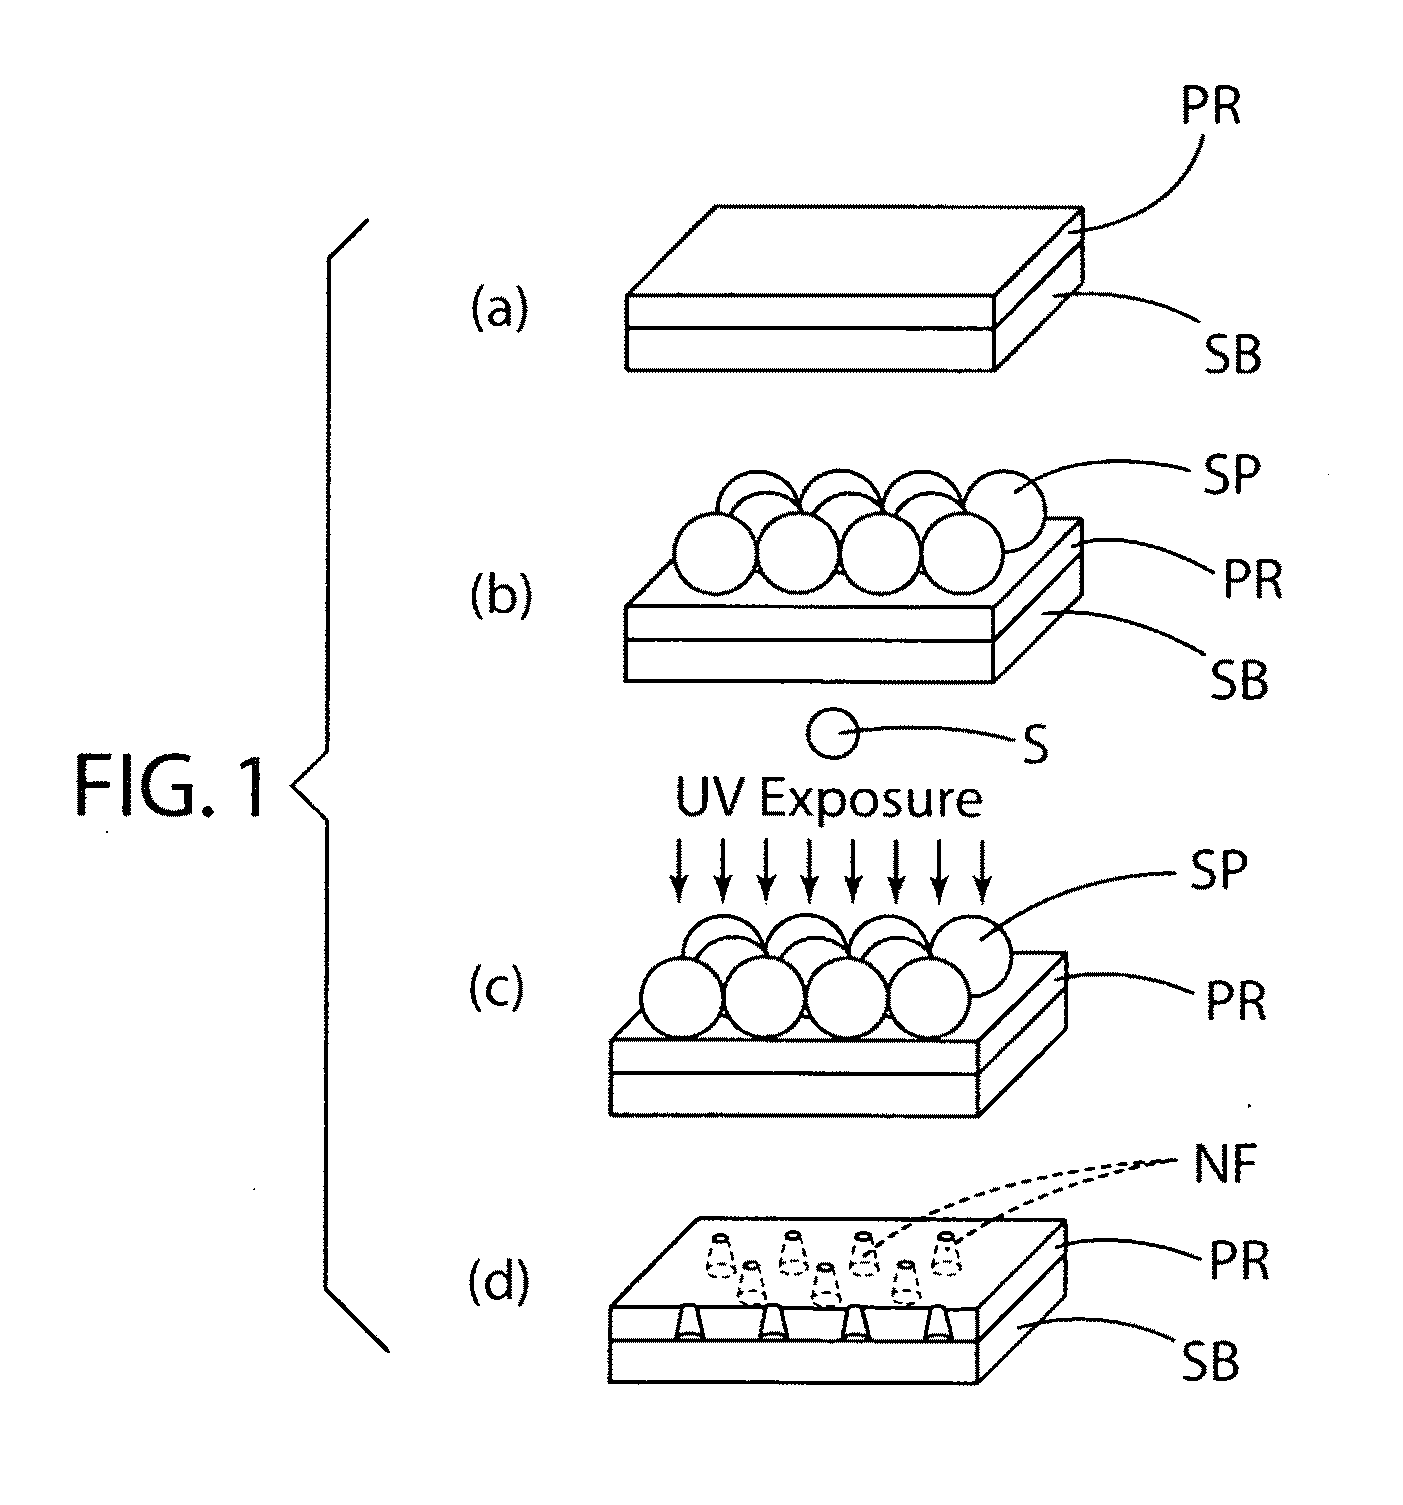 Process for formation of highly uniform arrays of nano-holes and nano-pillars